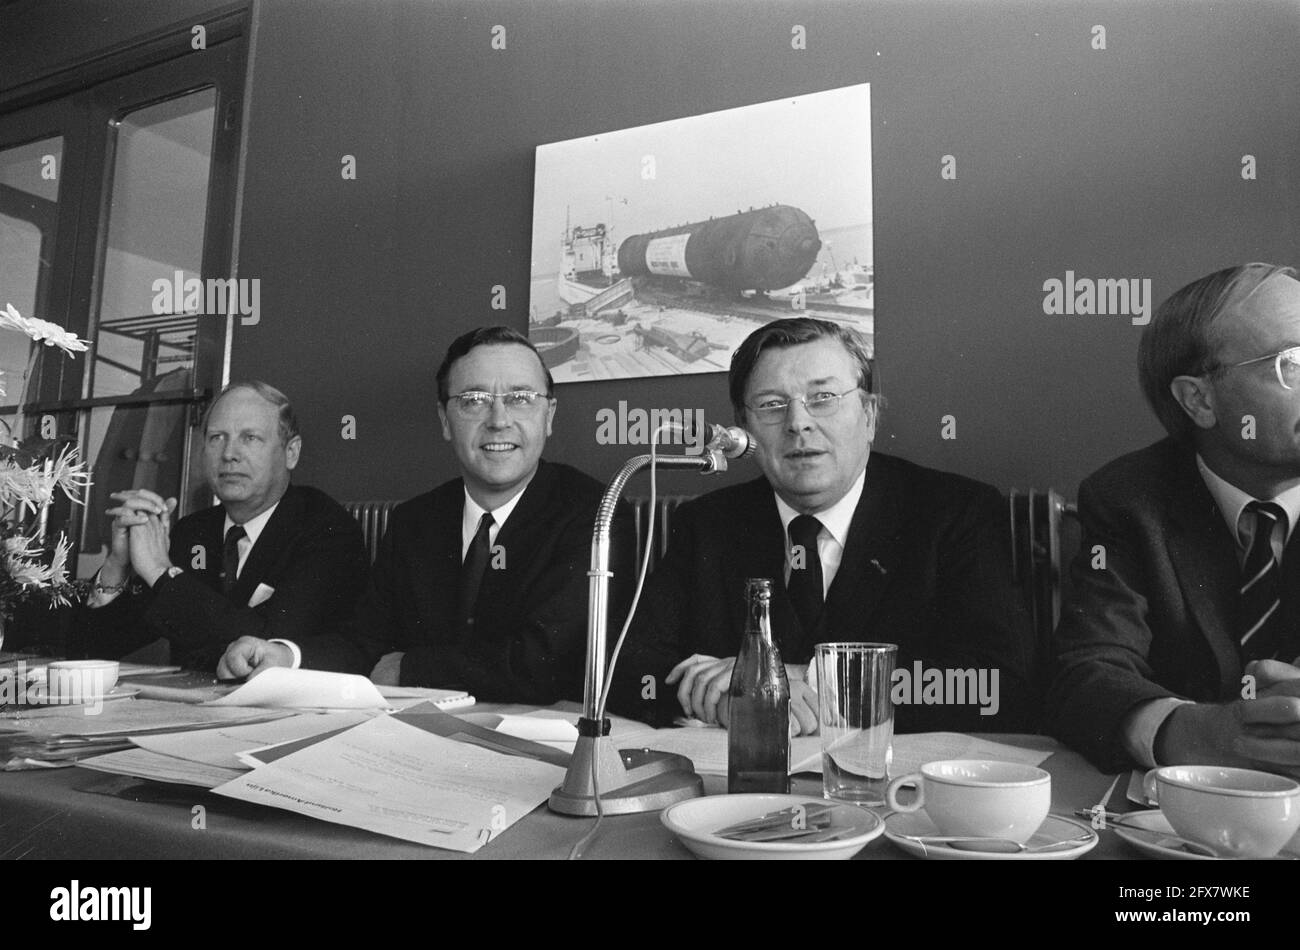 Shareholders' meeting at Holland America Line in Rotterdam; from left to right A. M. Lels, N. van de Vorm and prof. dr. C. F. Karsten, October 31, 1974, meetings, chairmen, The Netherlands, 20th century press agency photo, news to remember, documentary, historic photography 1945-1990, visual stories, human history of the Twentieth Century, capturing moments in time Stock Photo